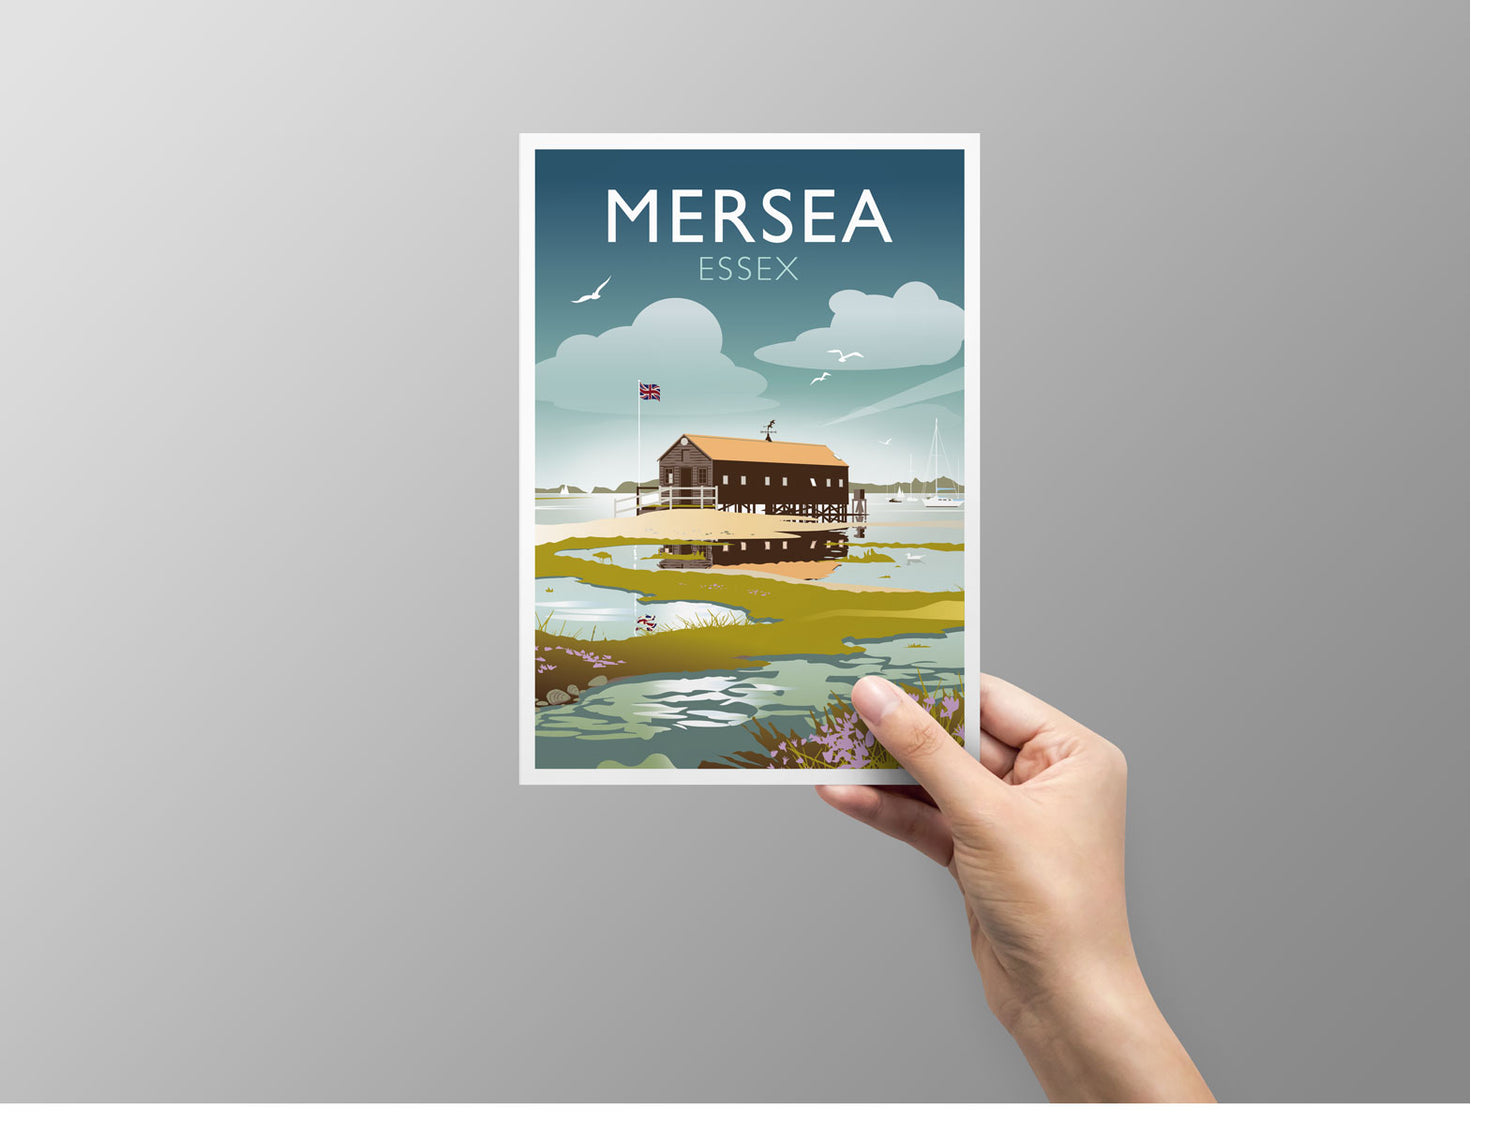 Mersea Packing Shed Greeting Card